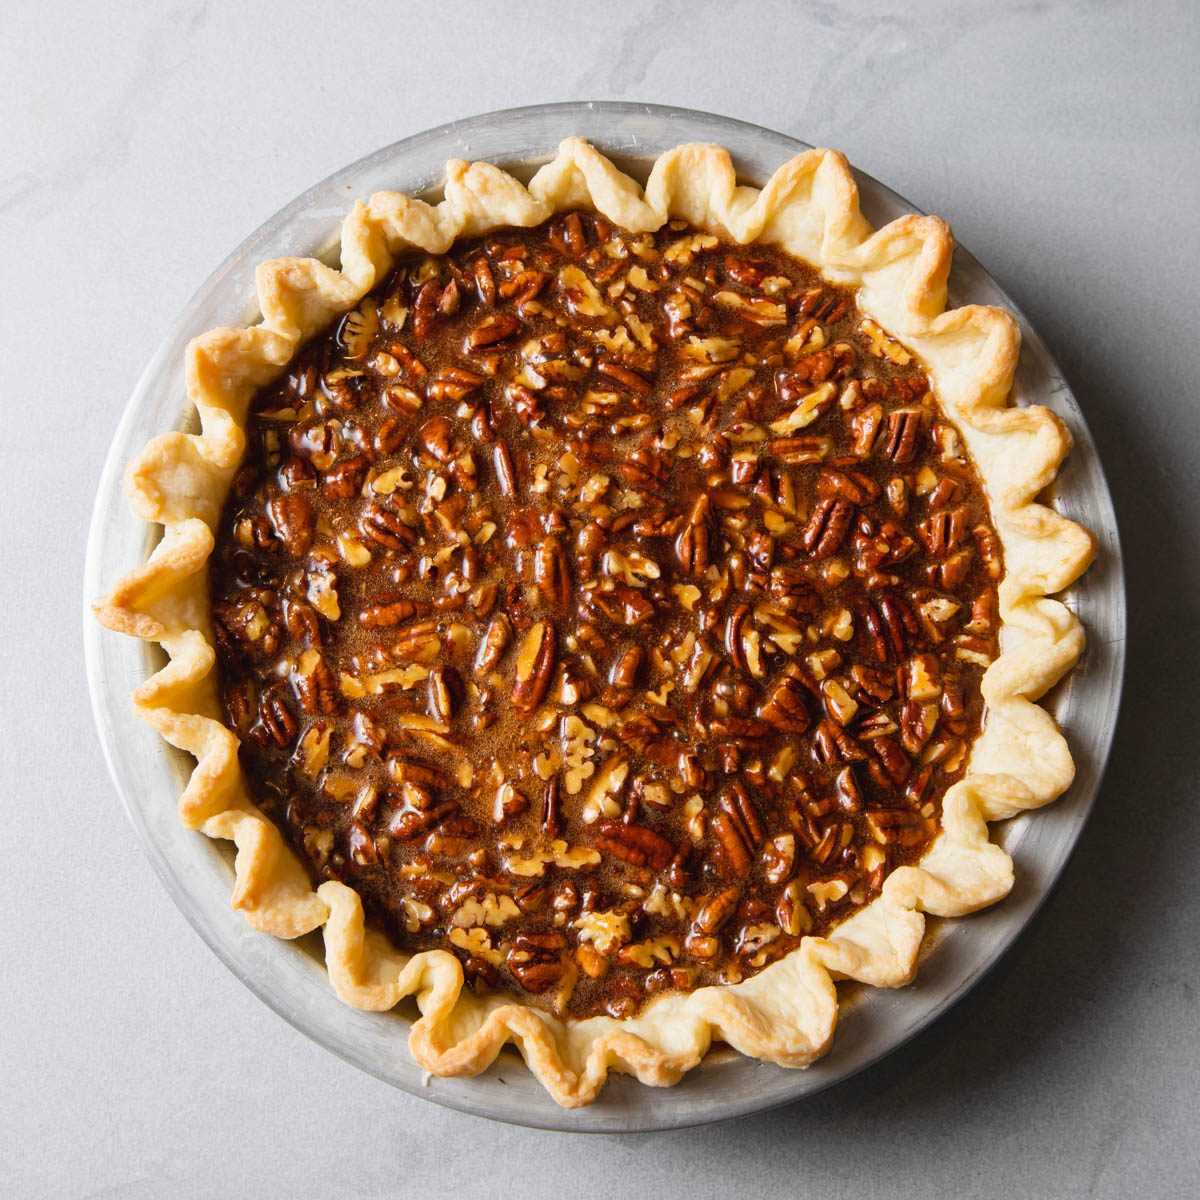 a pecan pie before baking